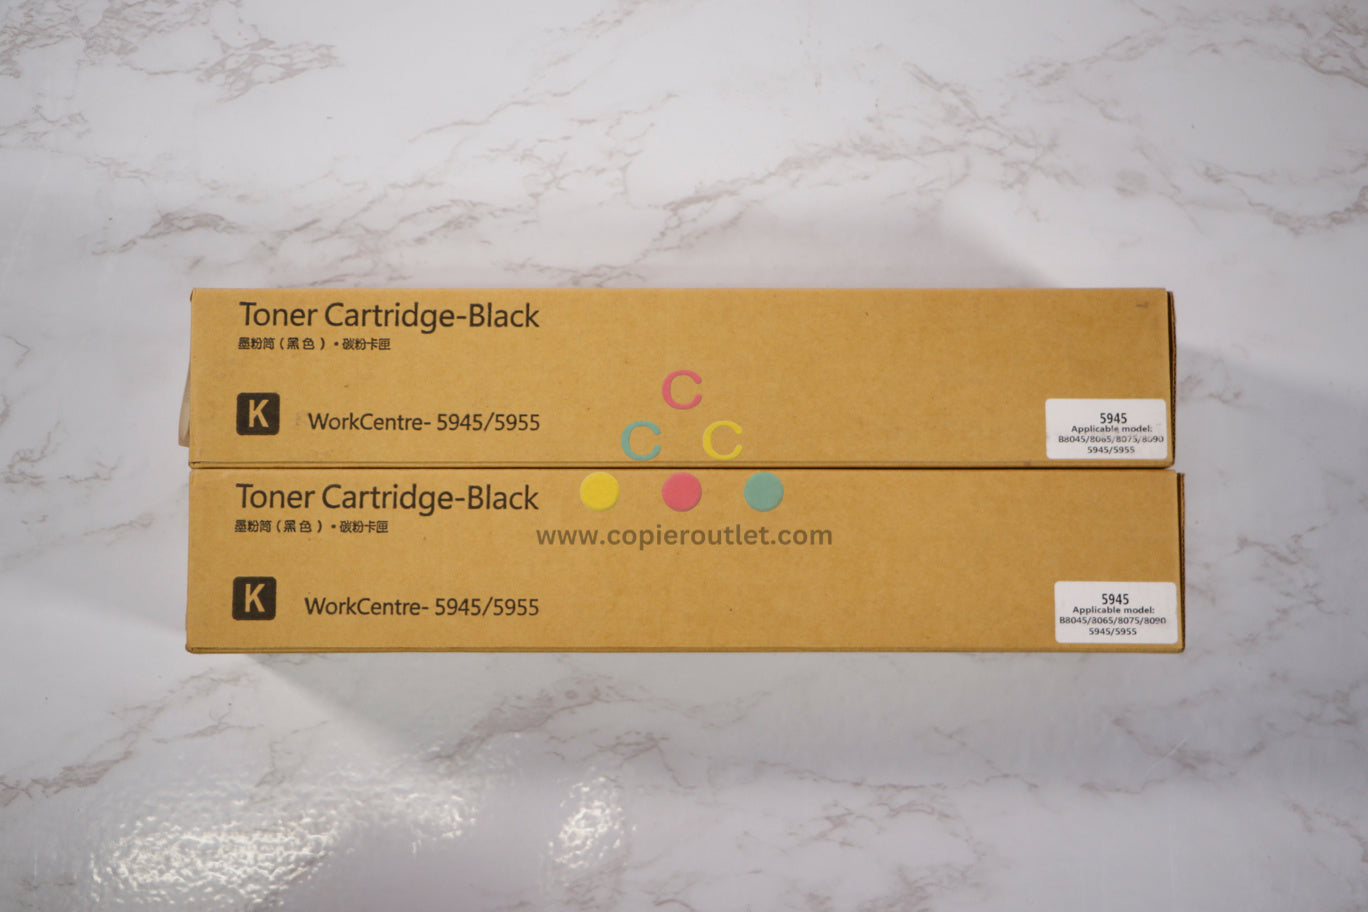 2 New Saiboya Compatible for Xerox WorkCentre 5945,5955 Black Toners 006R01605